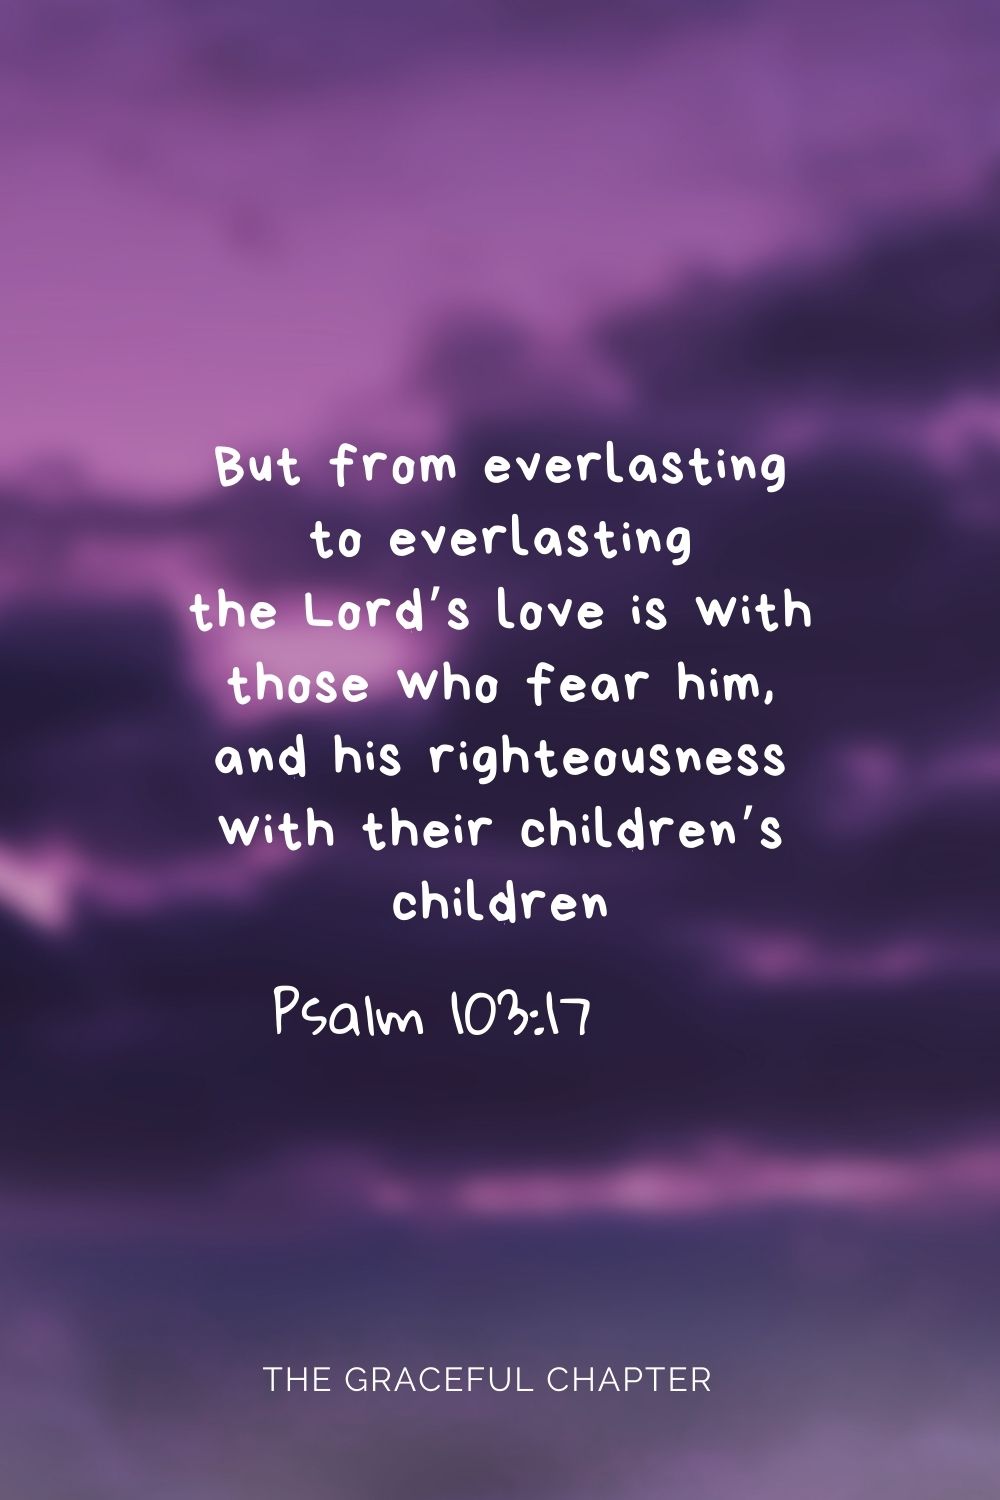 But from everlasting to everlasting the Lord’s love is with those who fear him, and his righteousness with their children’s children Psalm 103:17